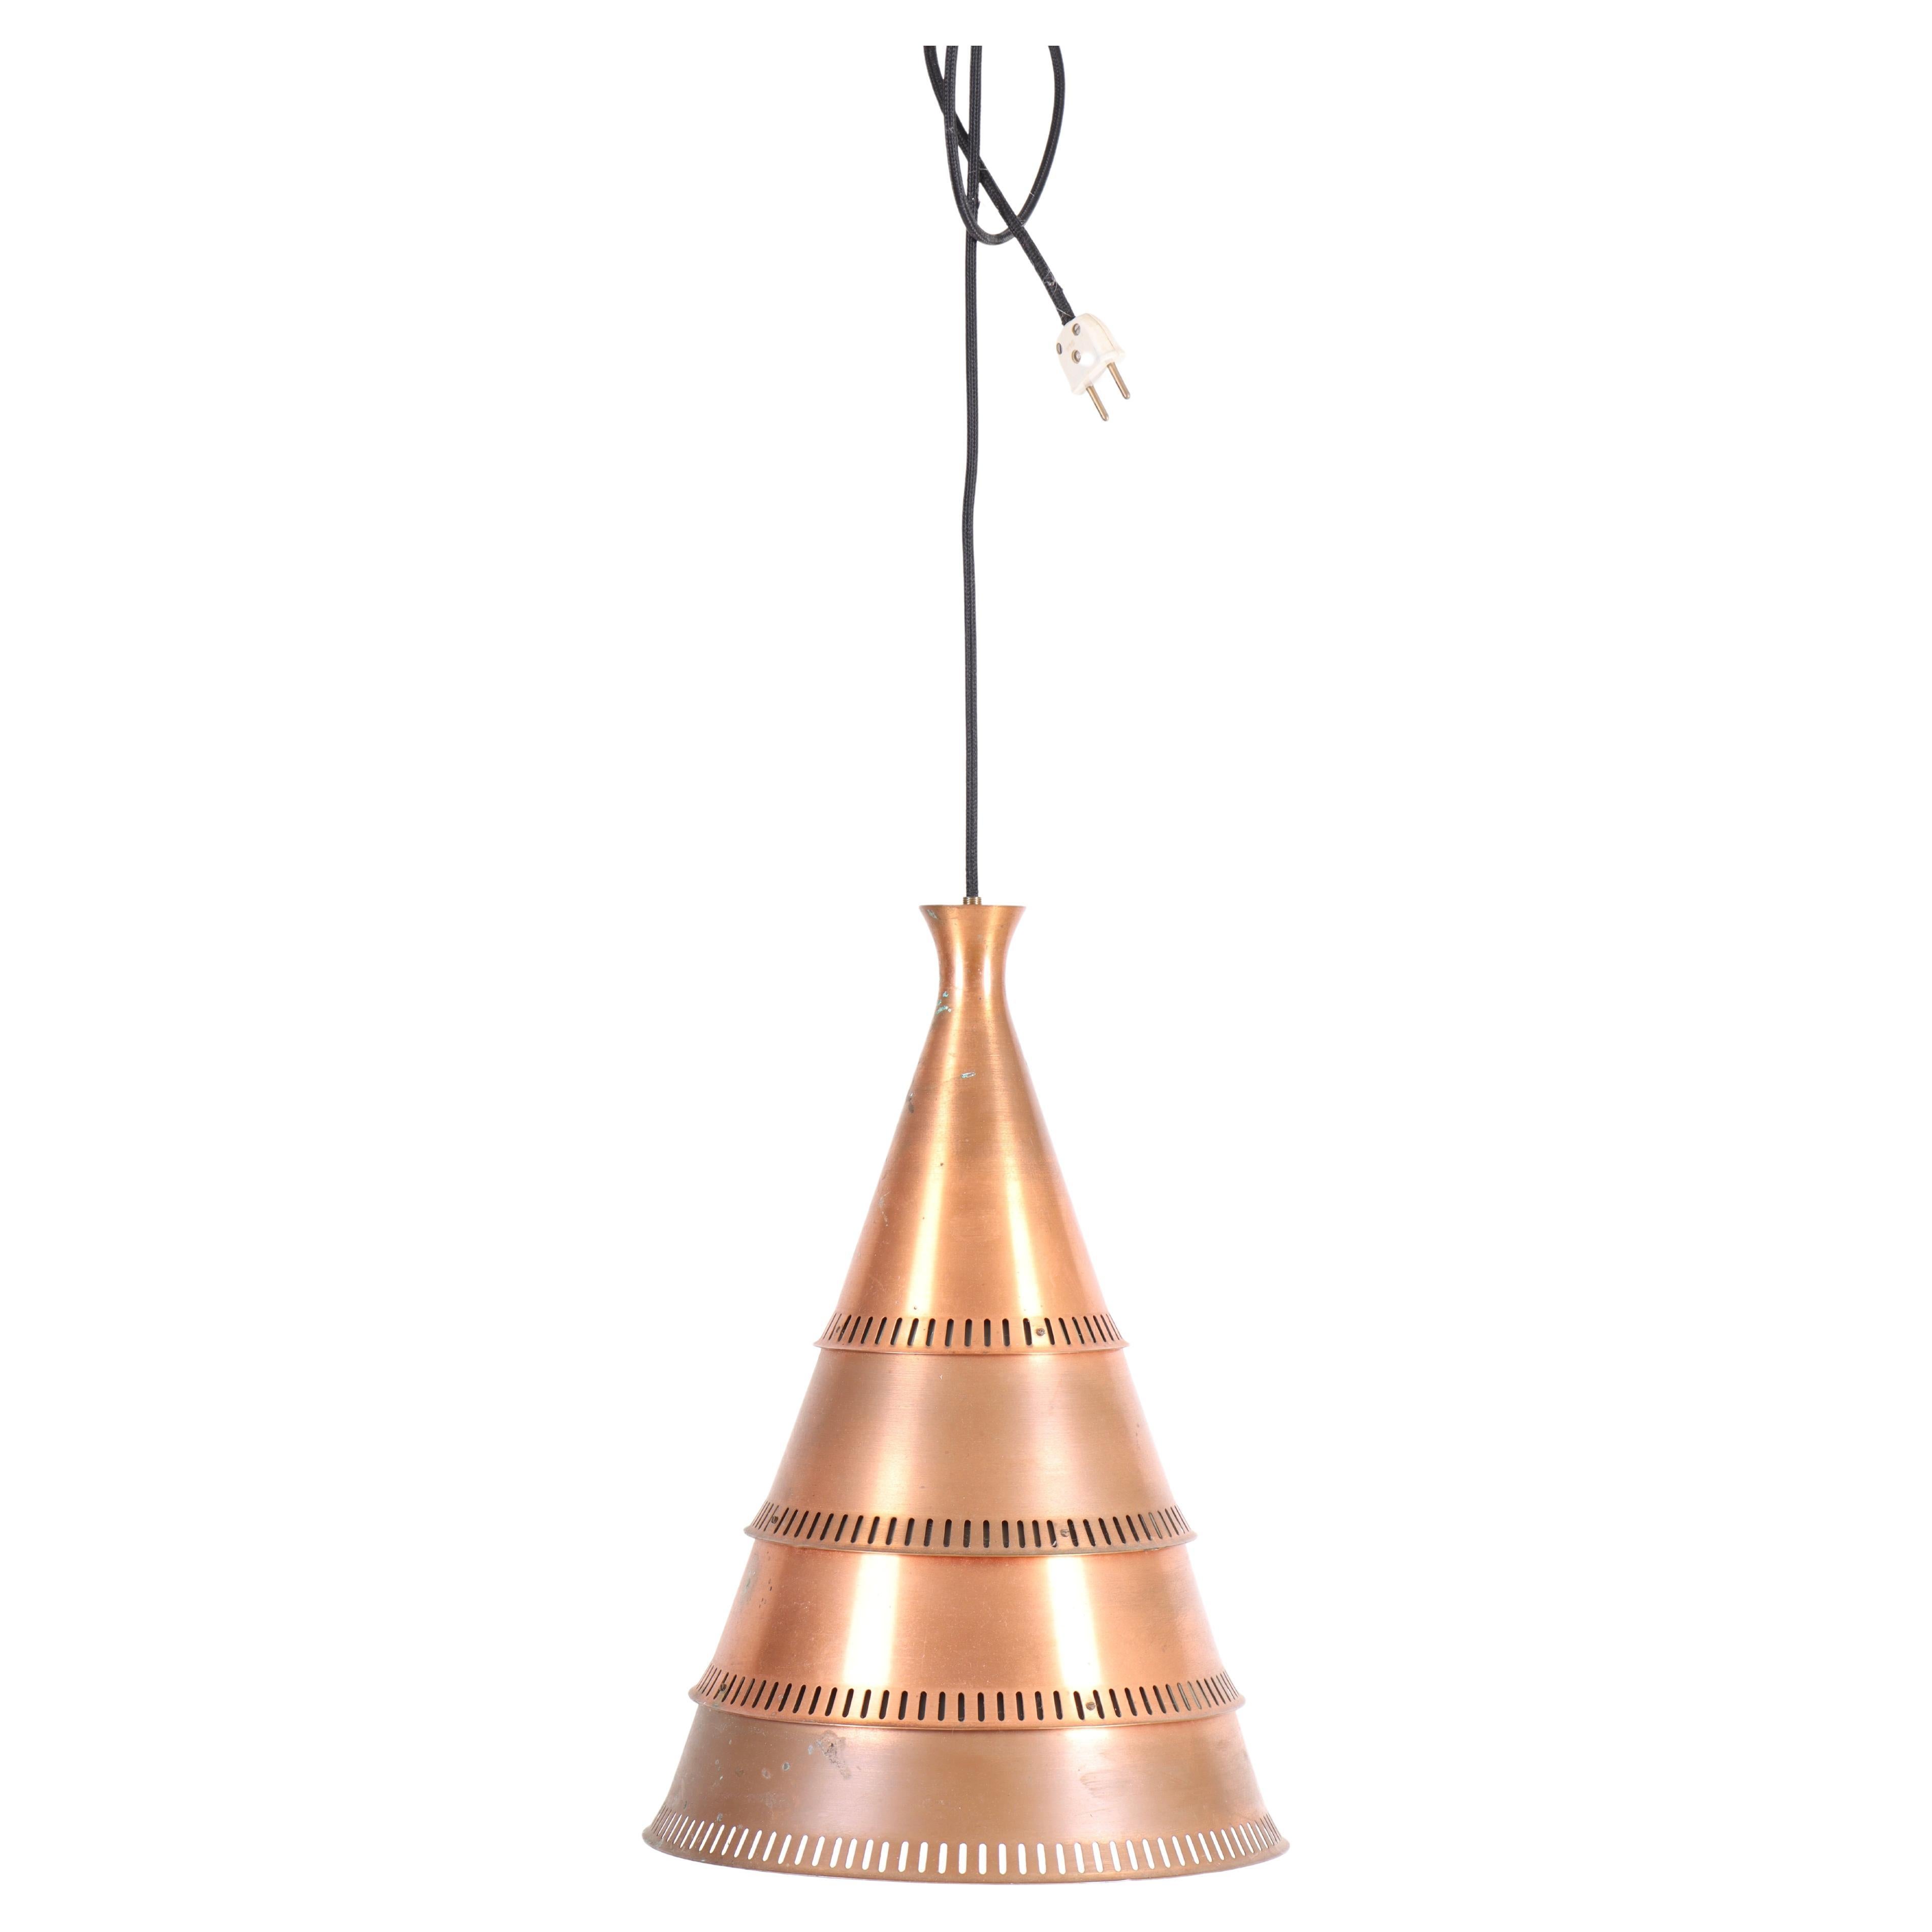 Pendant designed and made in Denmark 1960s. The shade is made in copper. Original condition.